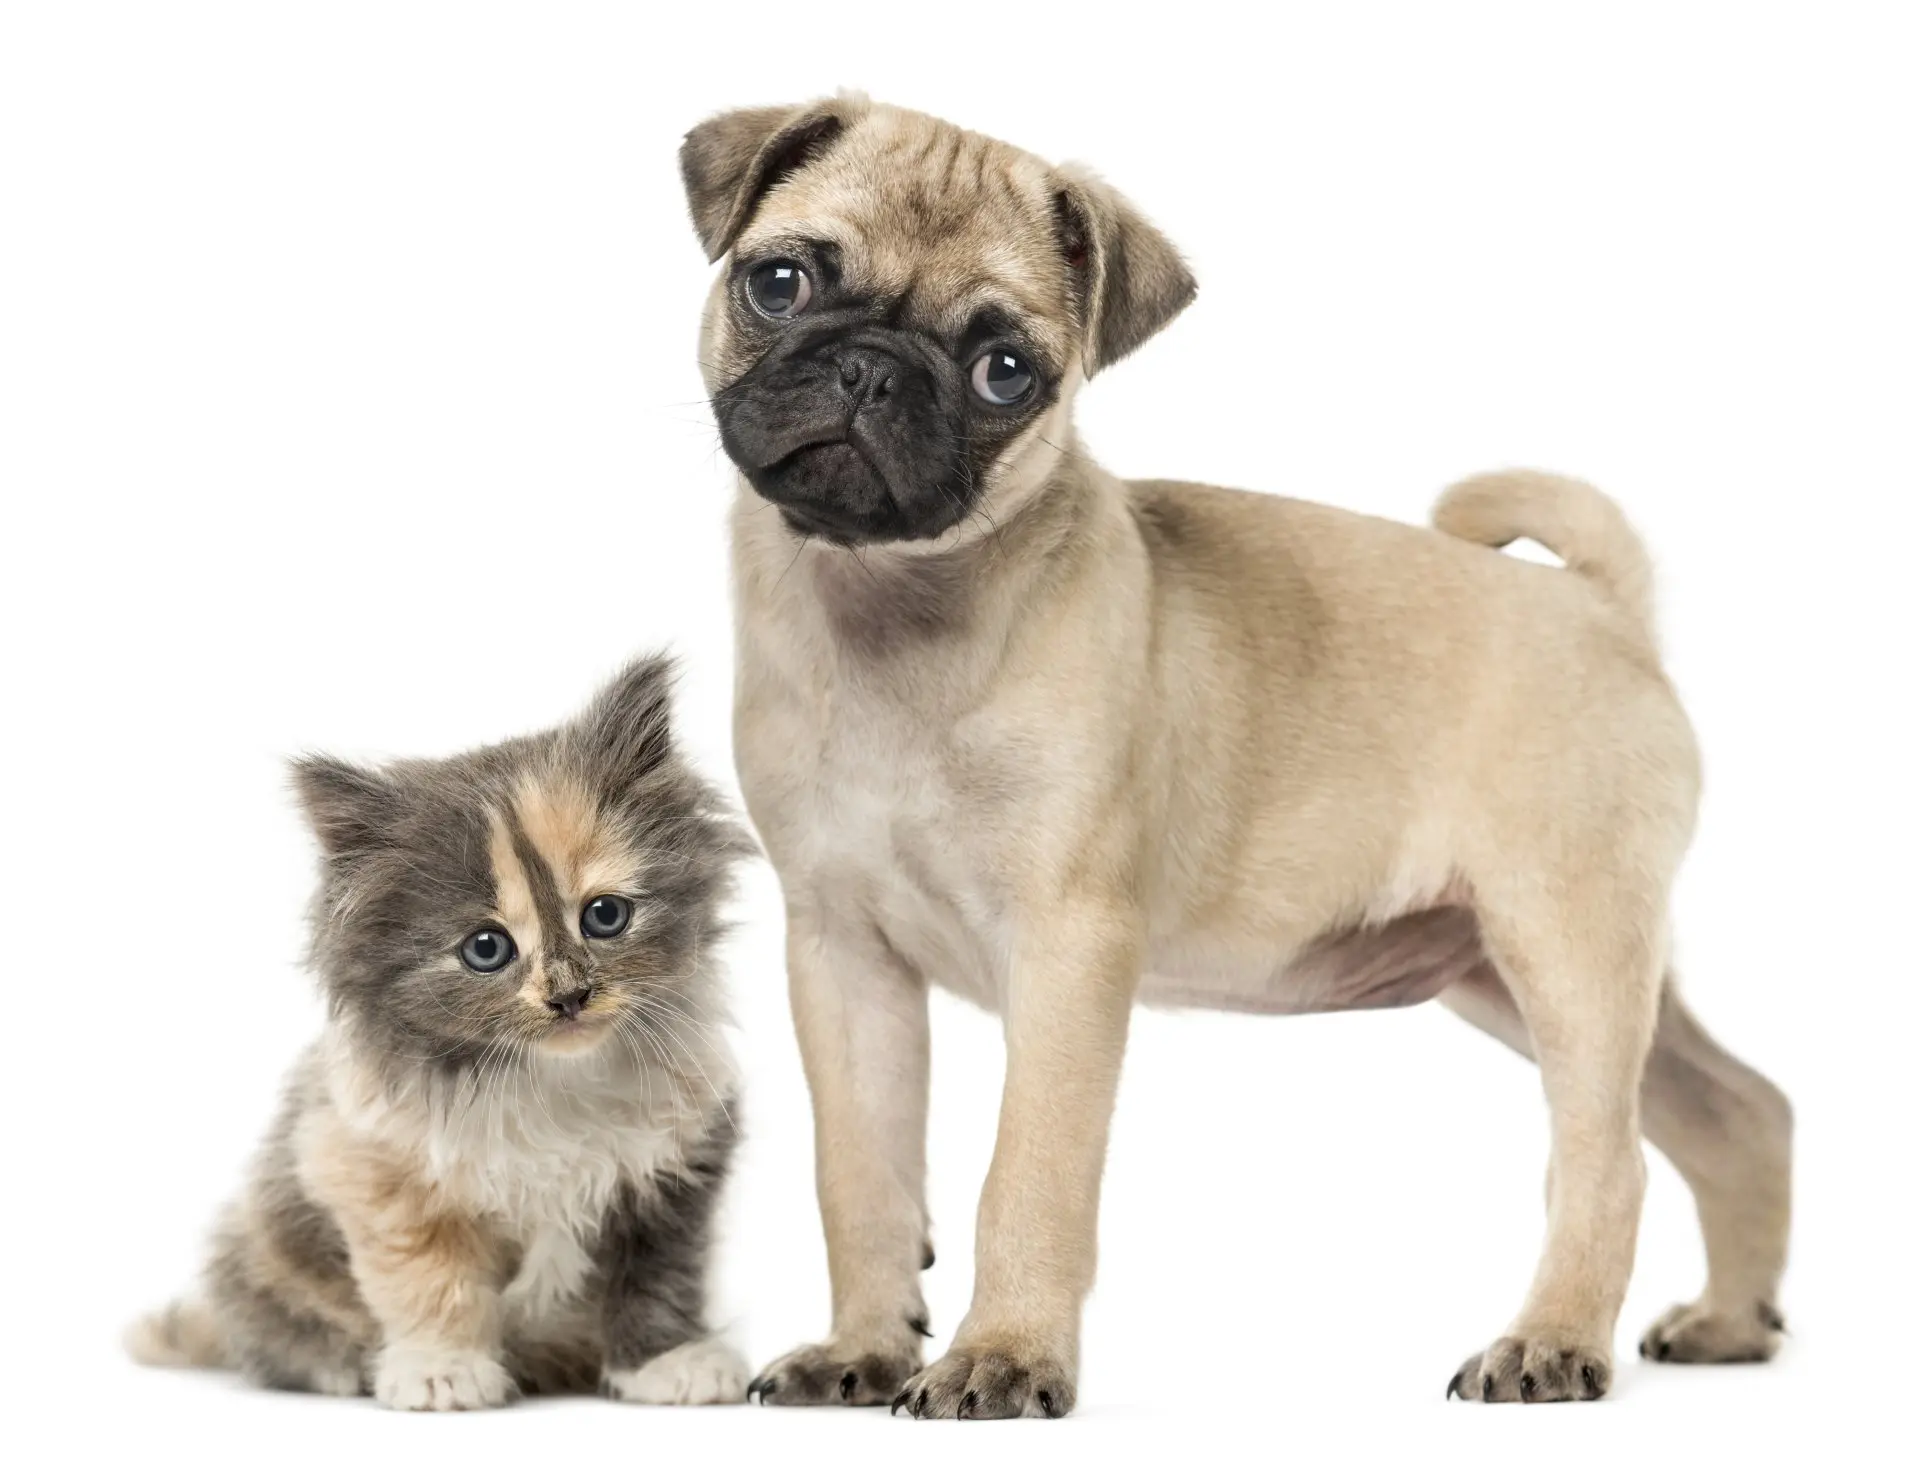 Pug puppy and European shorthair kitten standing on a white studio backdrop.